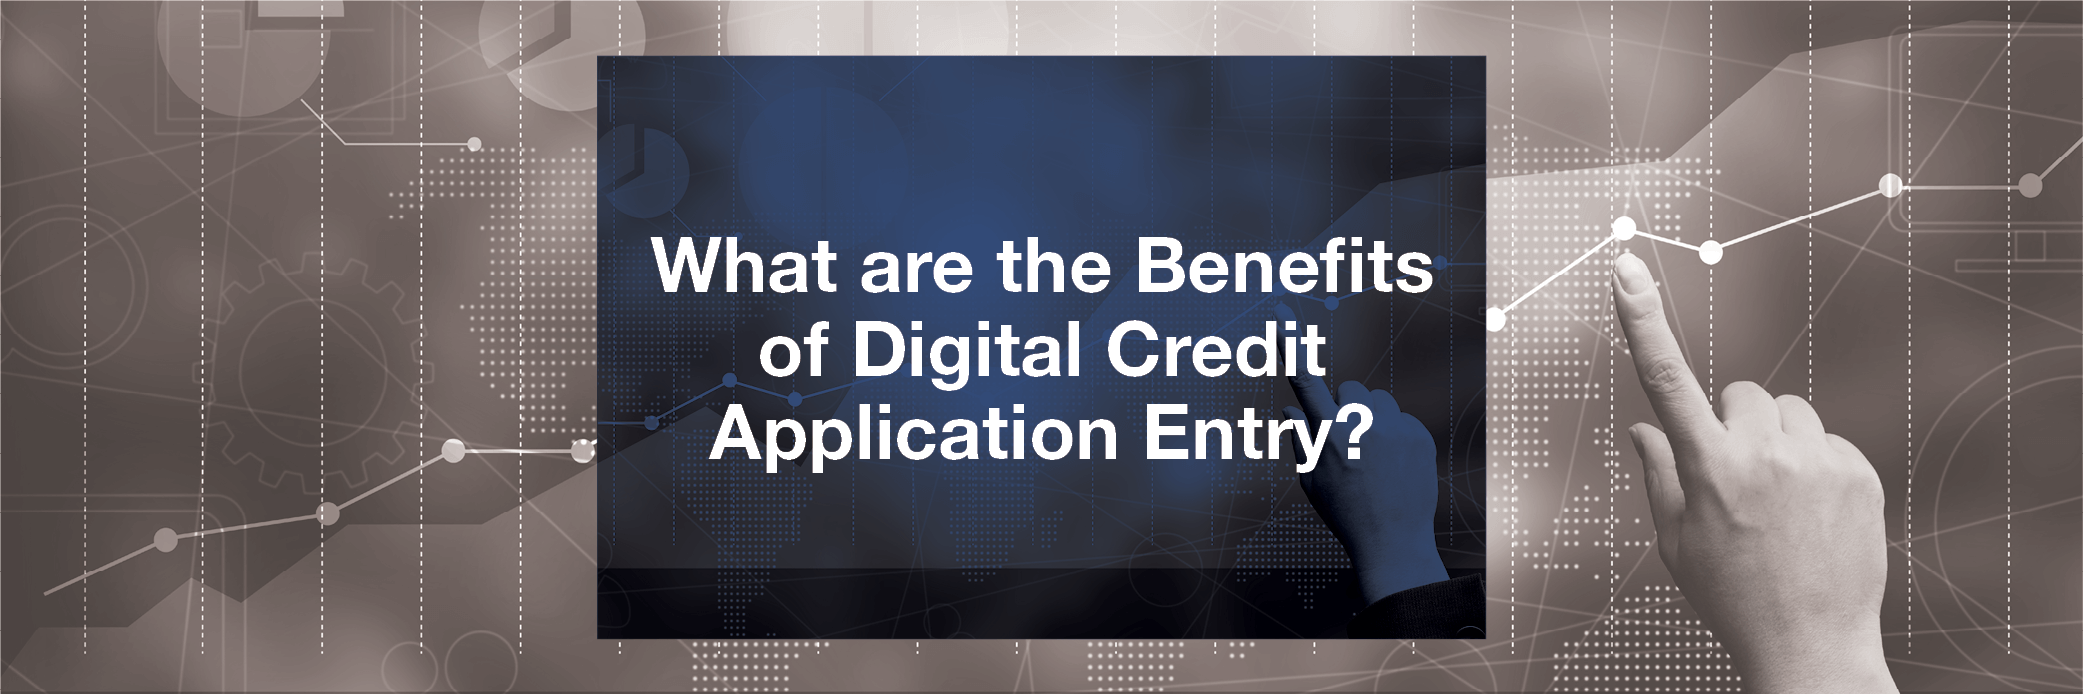 What are the Benefits of Digital Credit Application Entry?